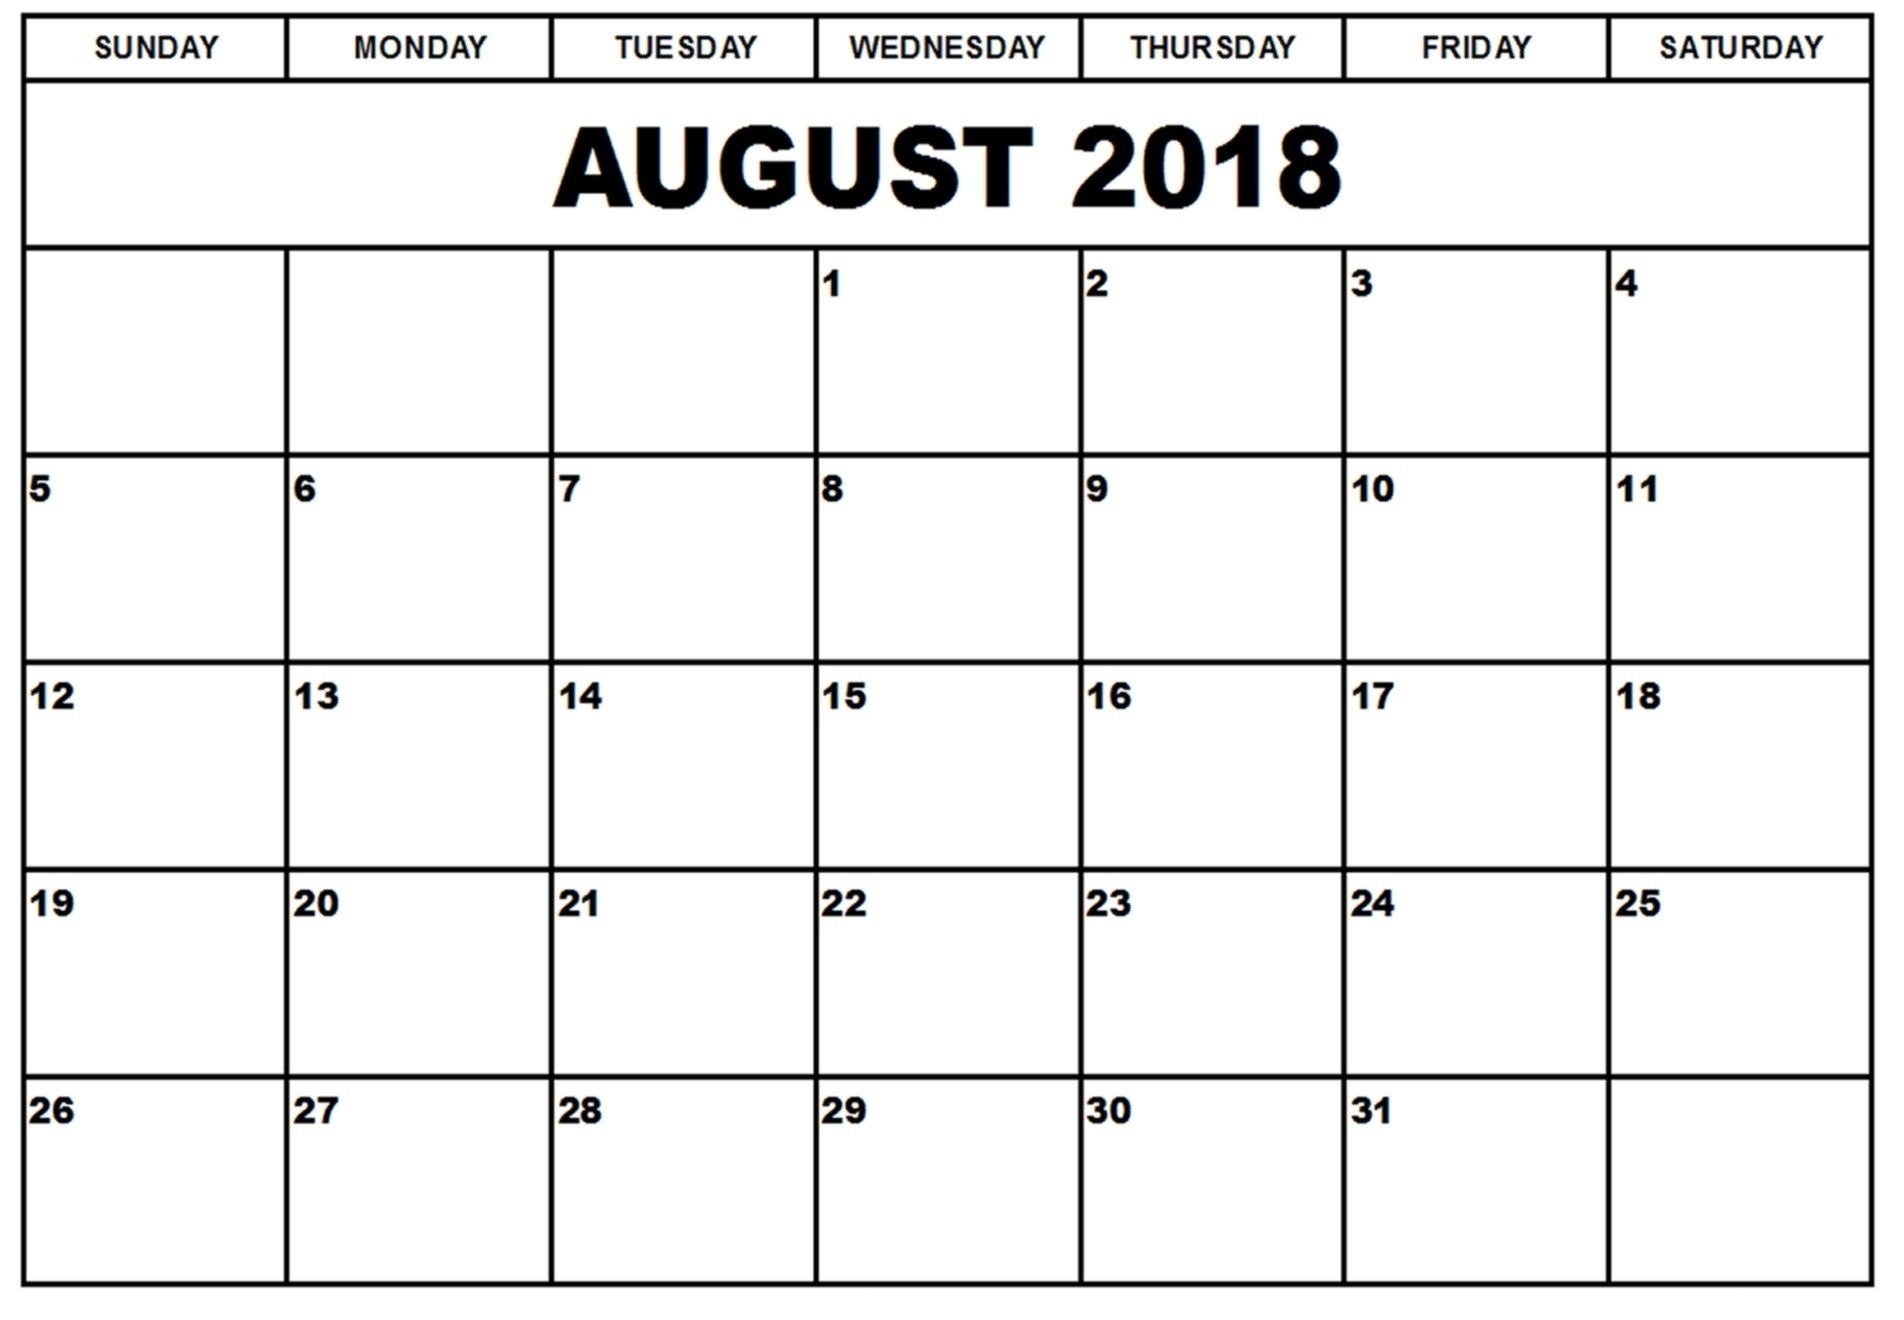 2018 August Calendar Printable Monthly Template - July 2019 Calendar for August Printable Calendar By Month